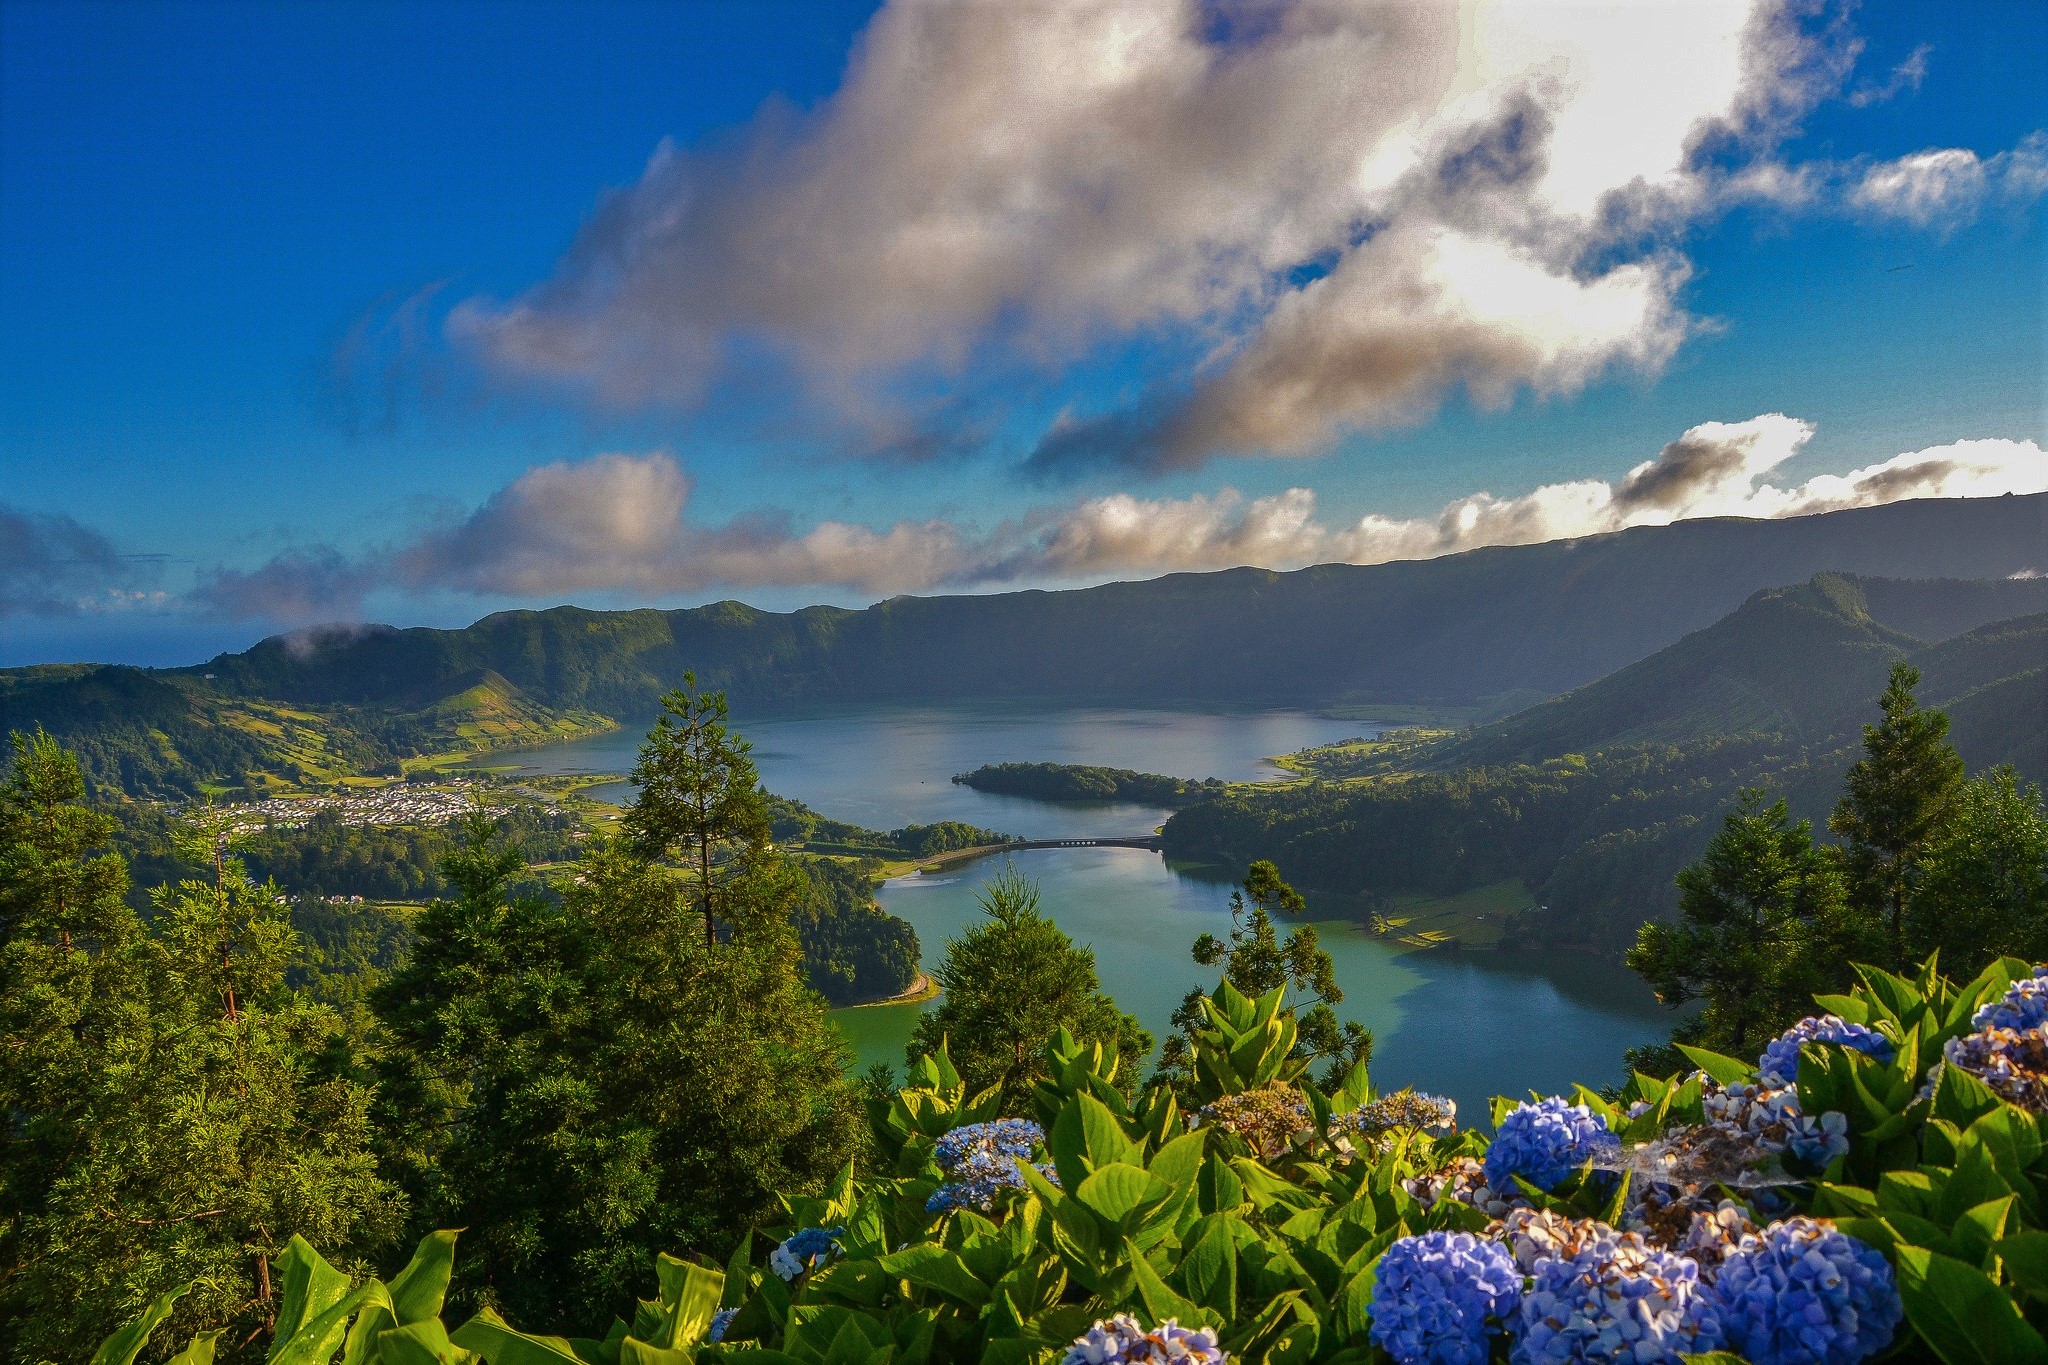 azores, photography, landscape, city, flower, forest, lake, mountain, portugal